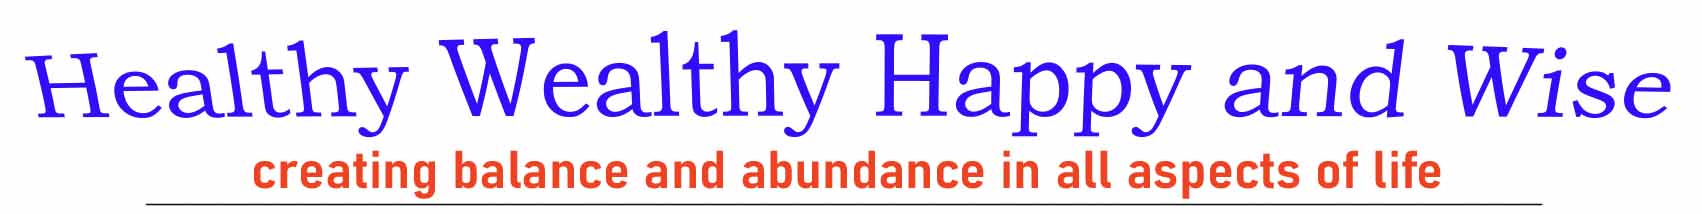 Healthy Wealthy Happy and Wise Logo